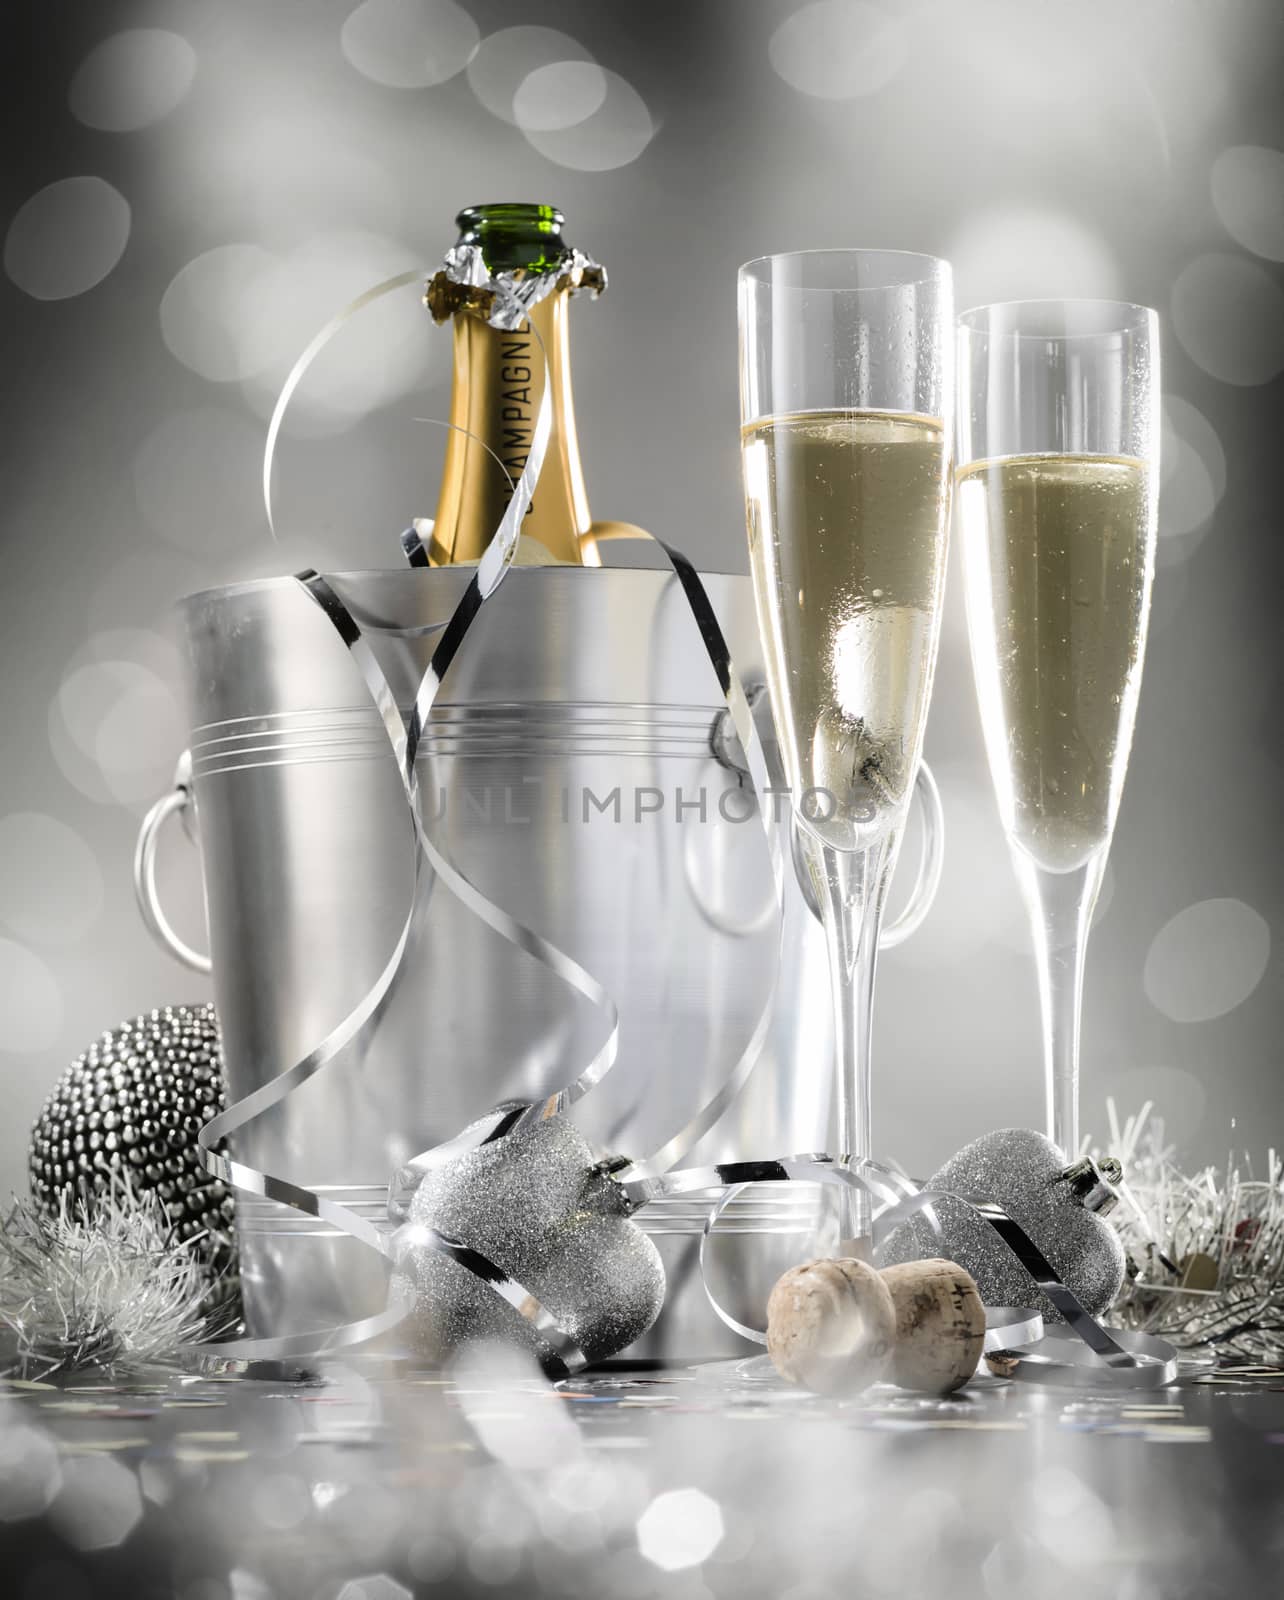 Pair glass of champagne with bottle in metal container. New Year by janssenkruseproductions